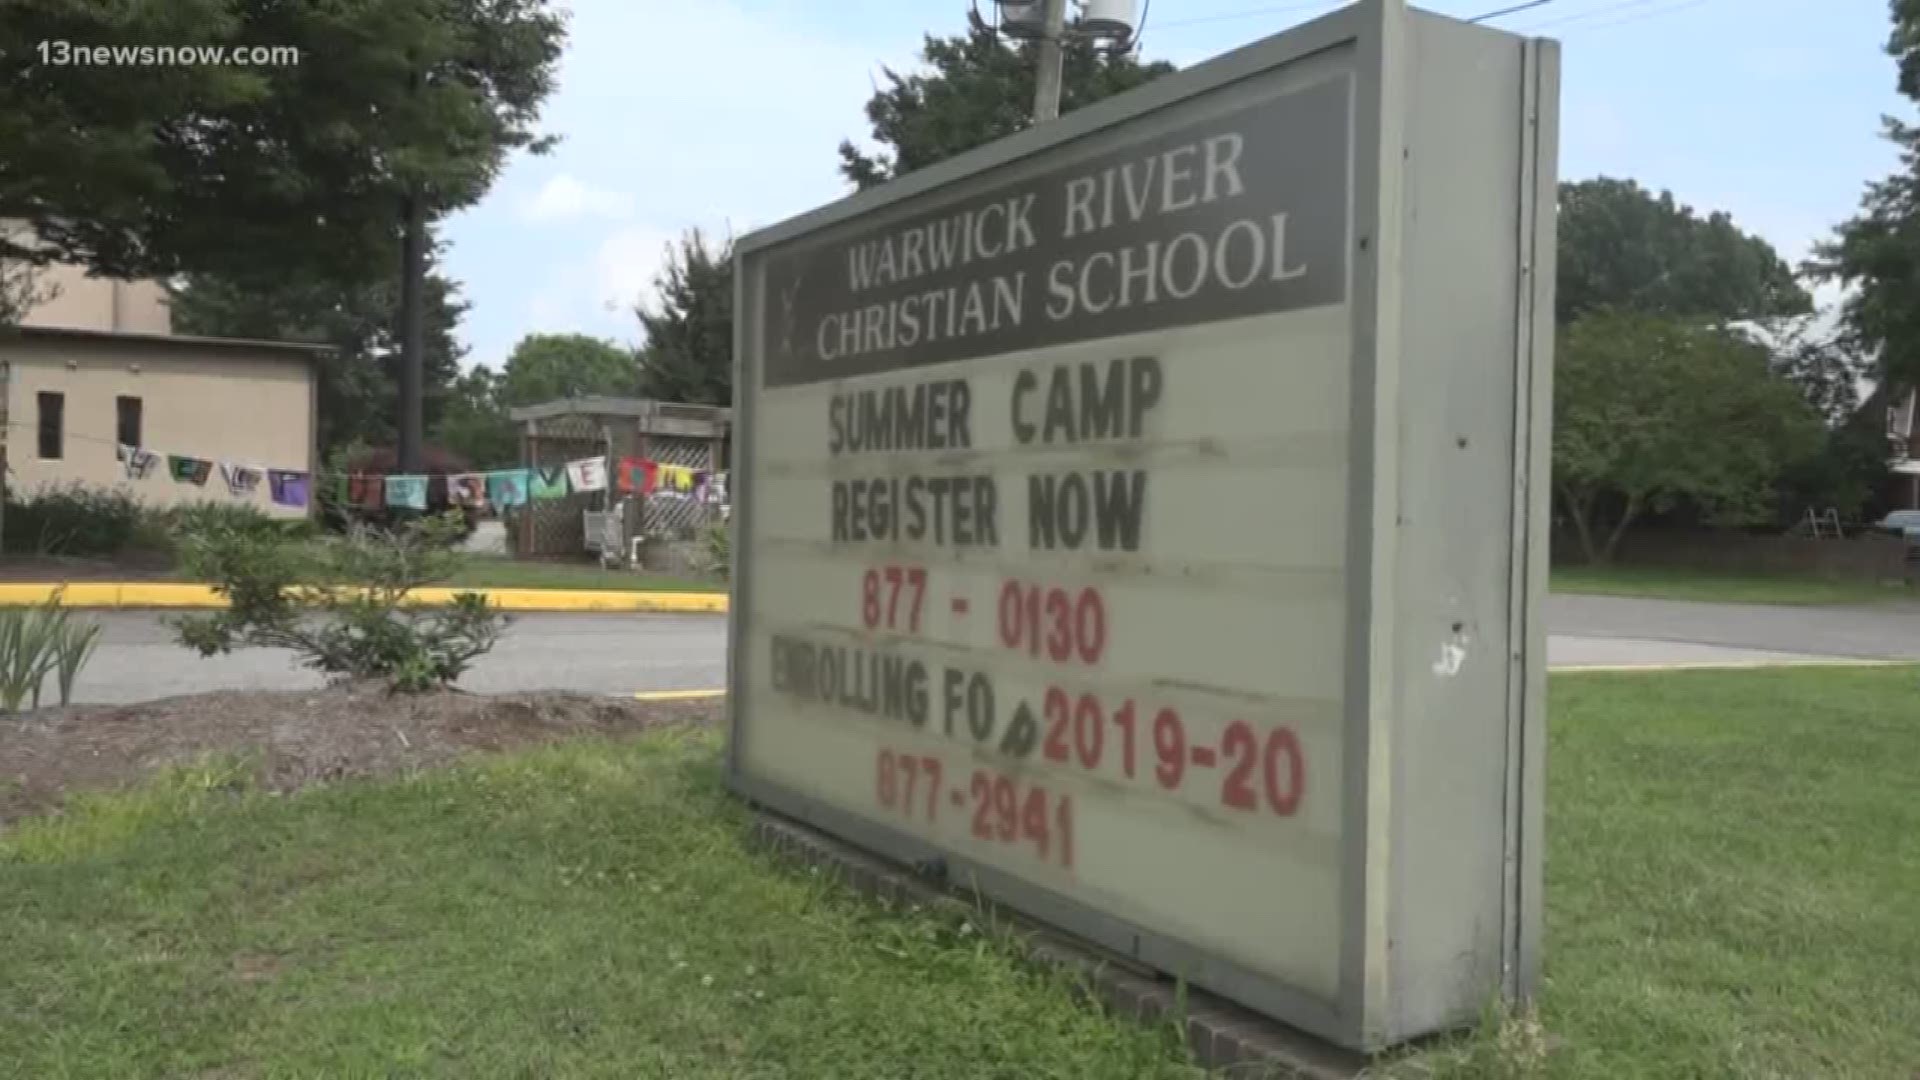 Parents were able to raise some of the $500,000 needed to keep Warwick Christian School open for at least one year.